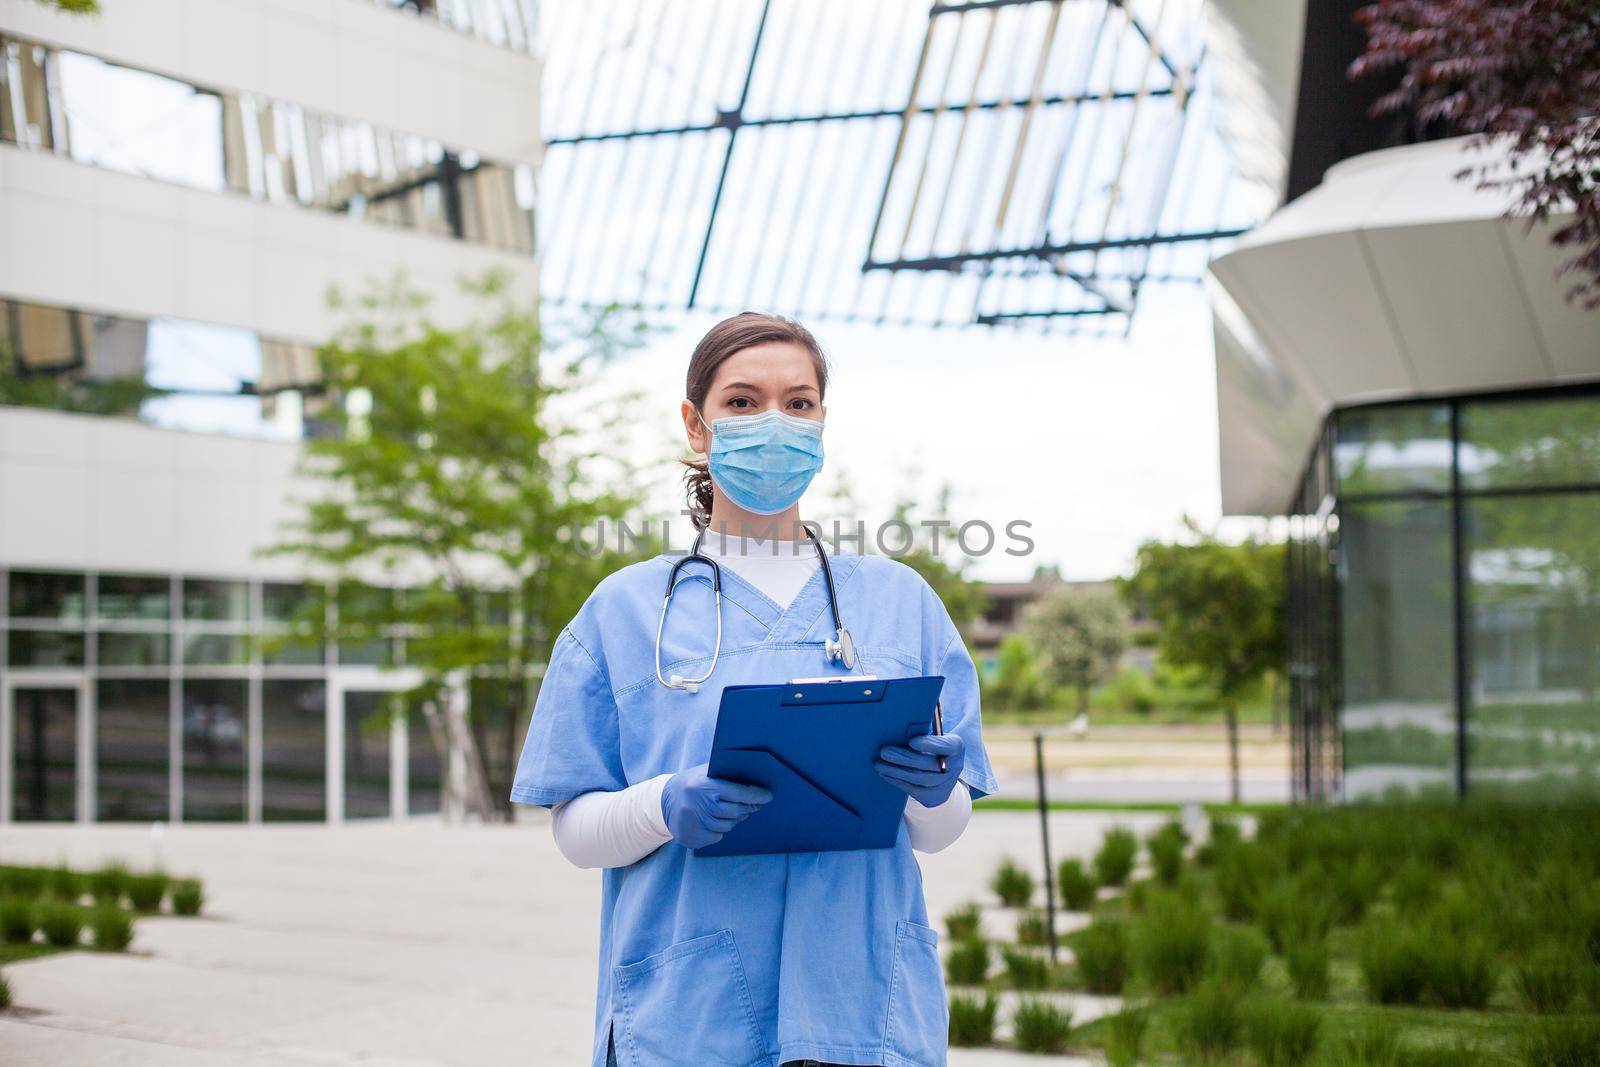 Head of care wearing personal protective equipment holding folder standing in front of nursing home,Coronavirus COVID-19 pandemic outbreak crisis,worried exhausted frontline staff,medical key worker by Plyushkin